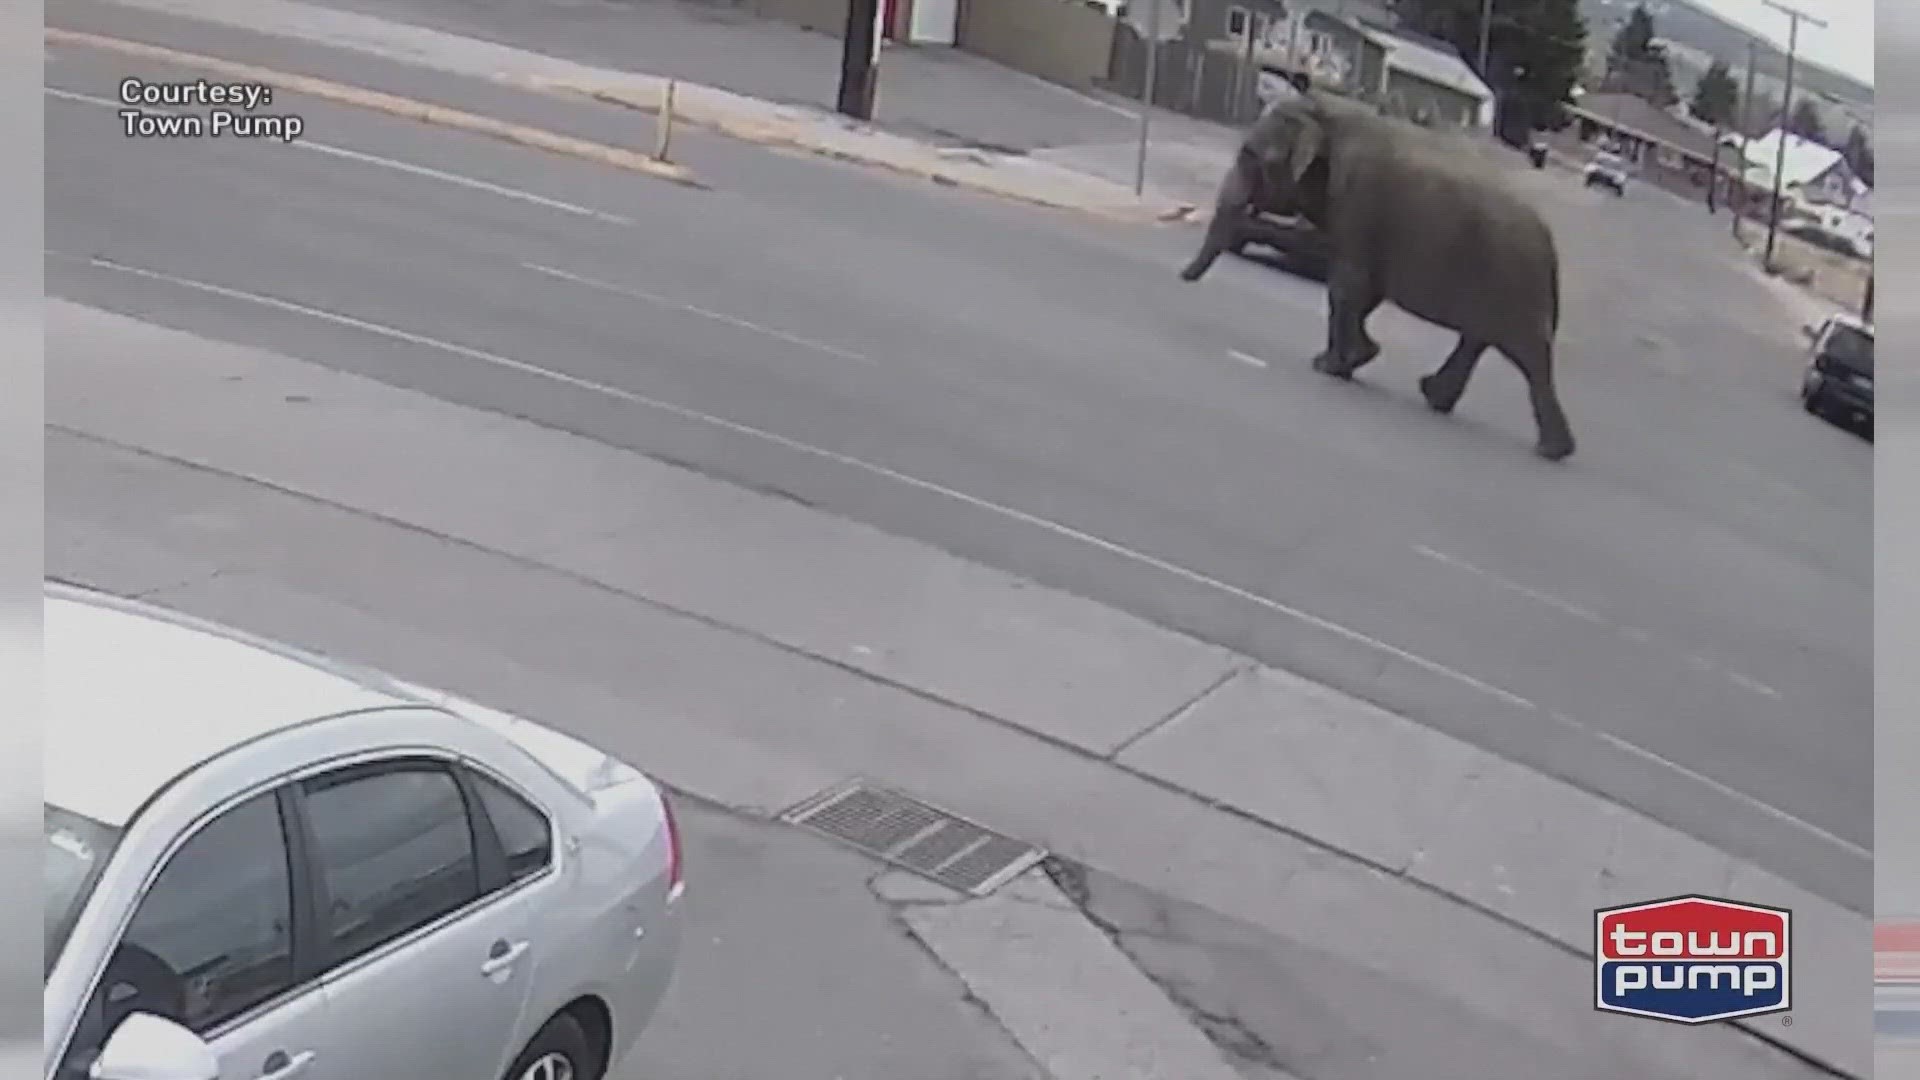 The elephant was caught on camera passing by shopping centers and neighborhoods.